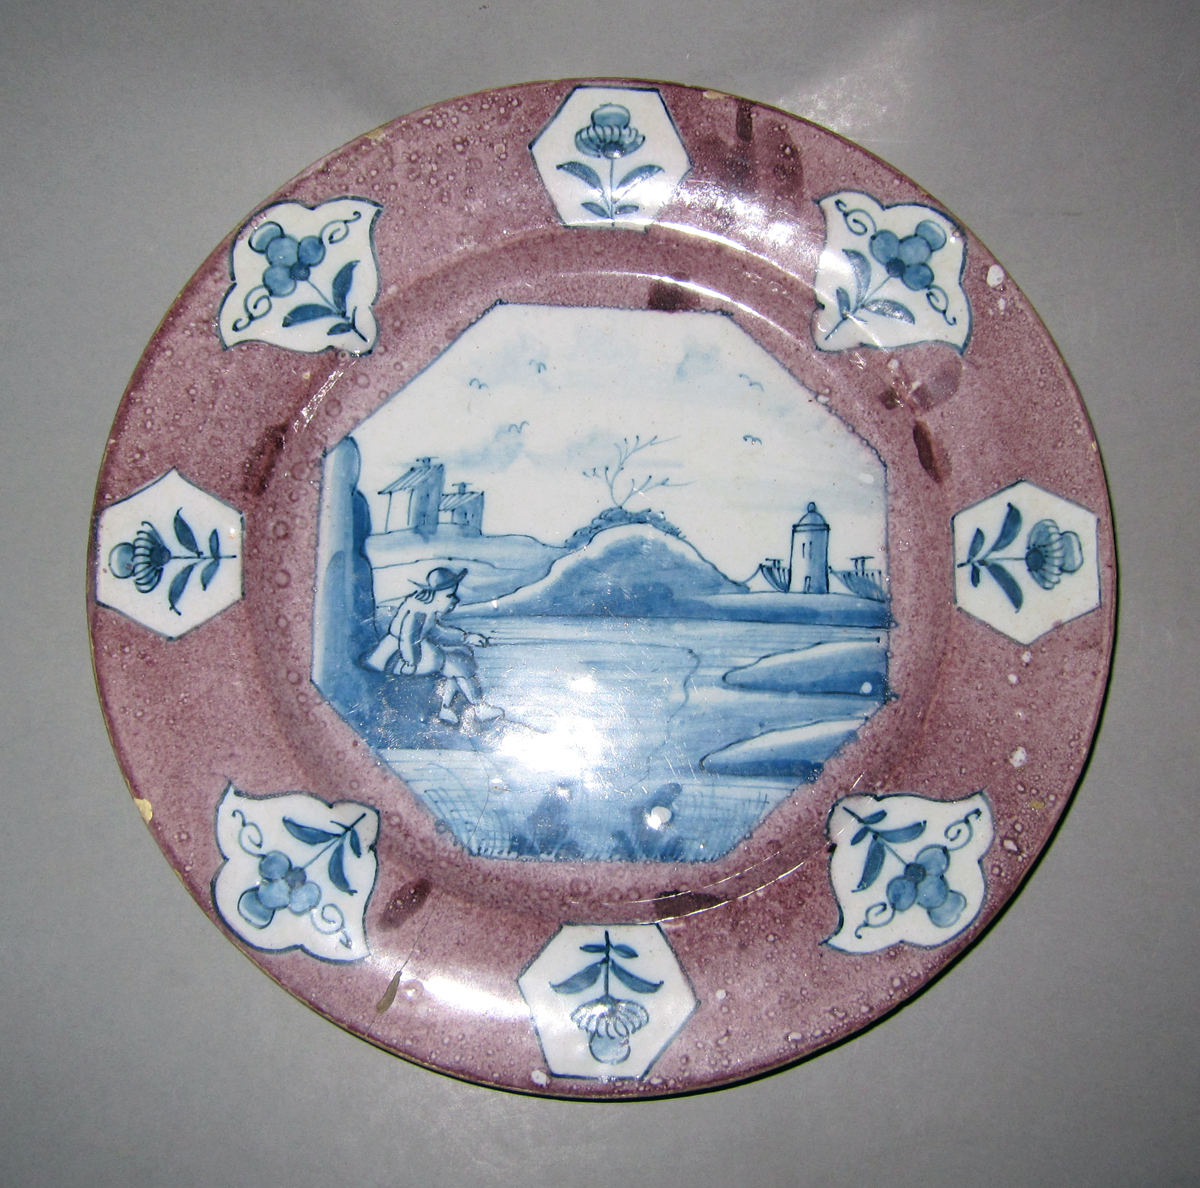 2003.0022.058 Delft plate or dinner plate